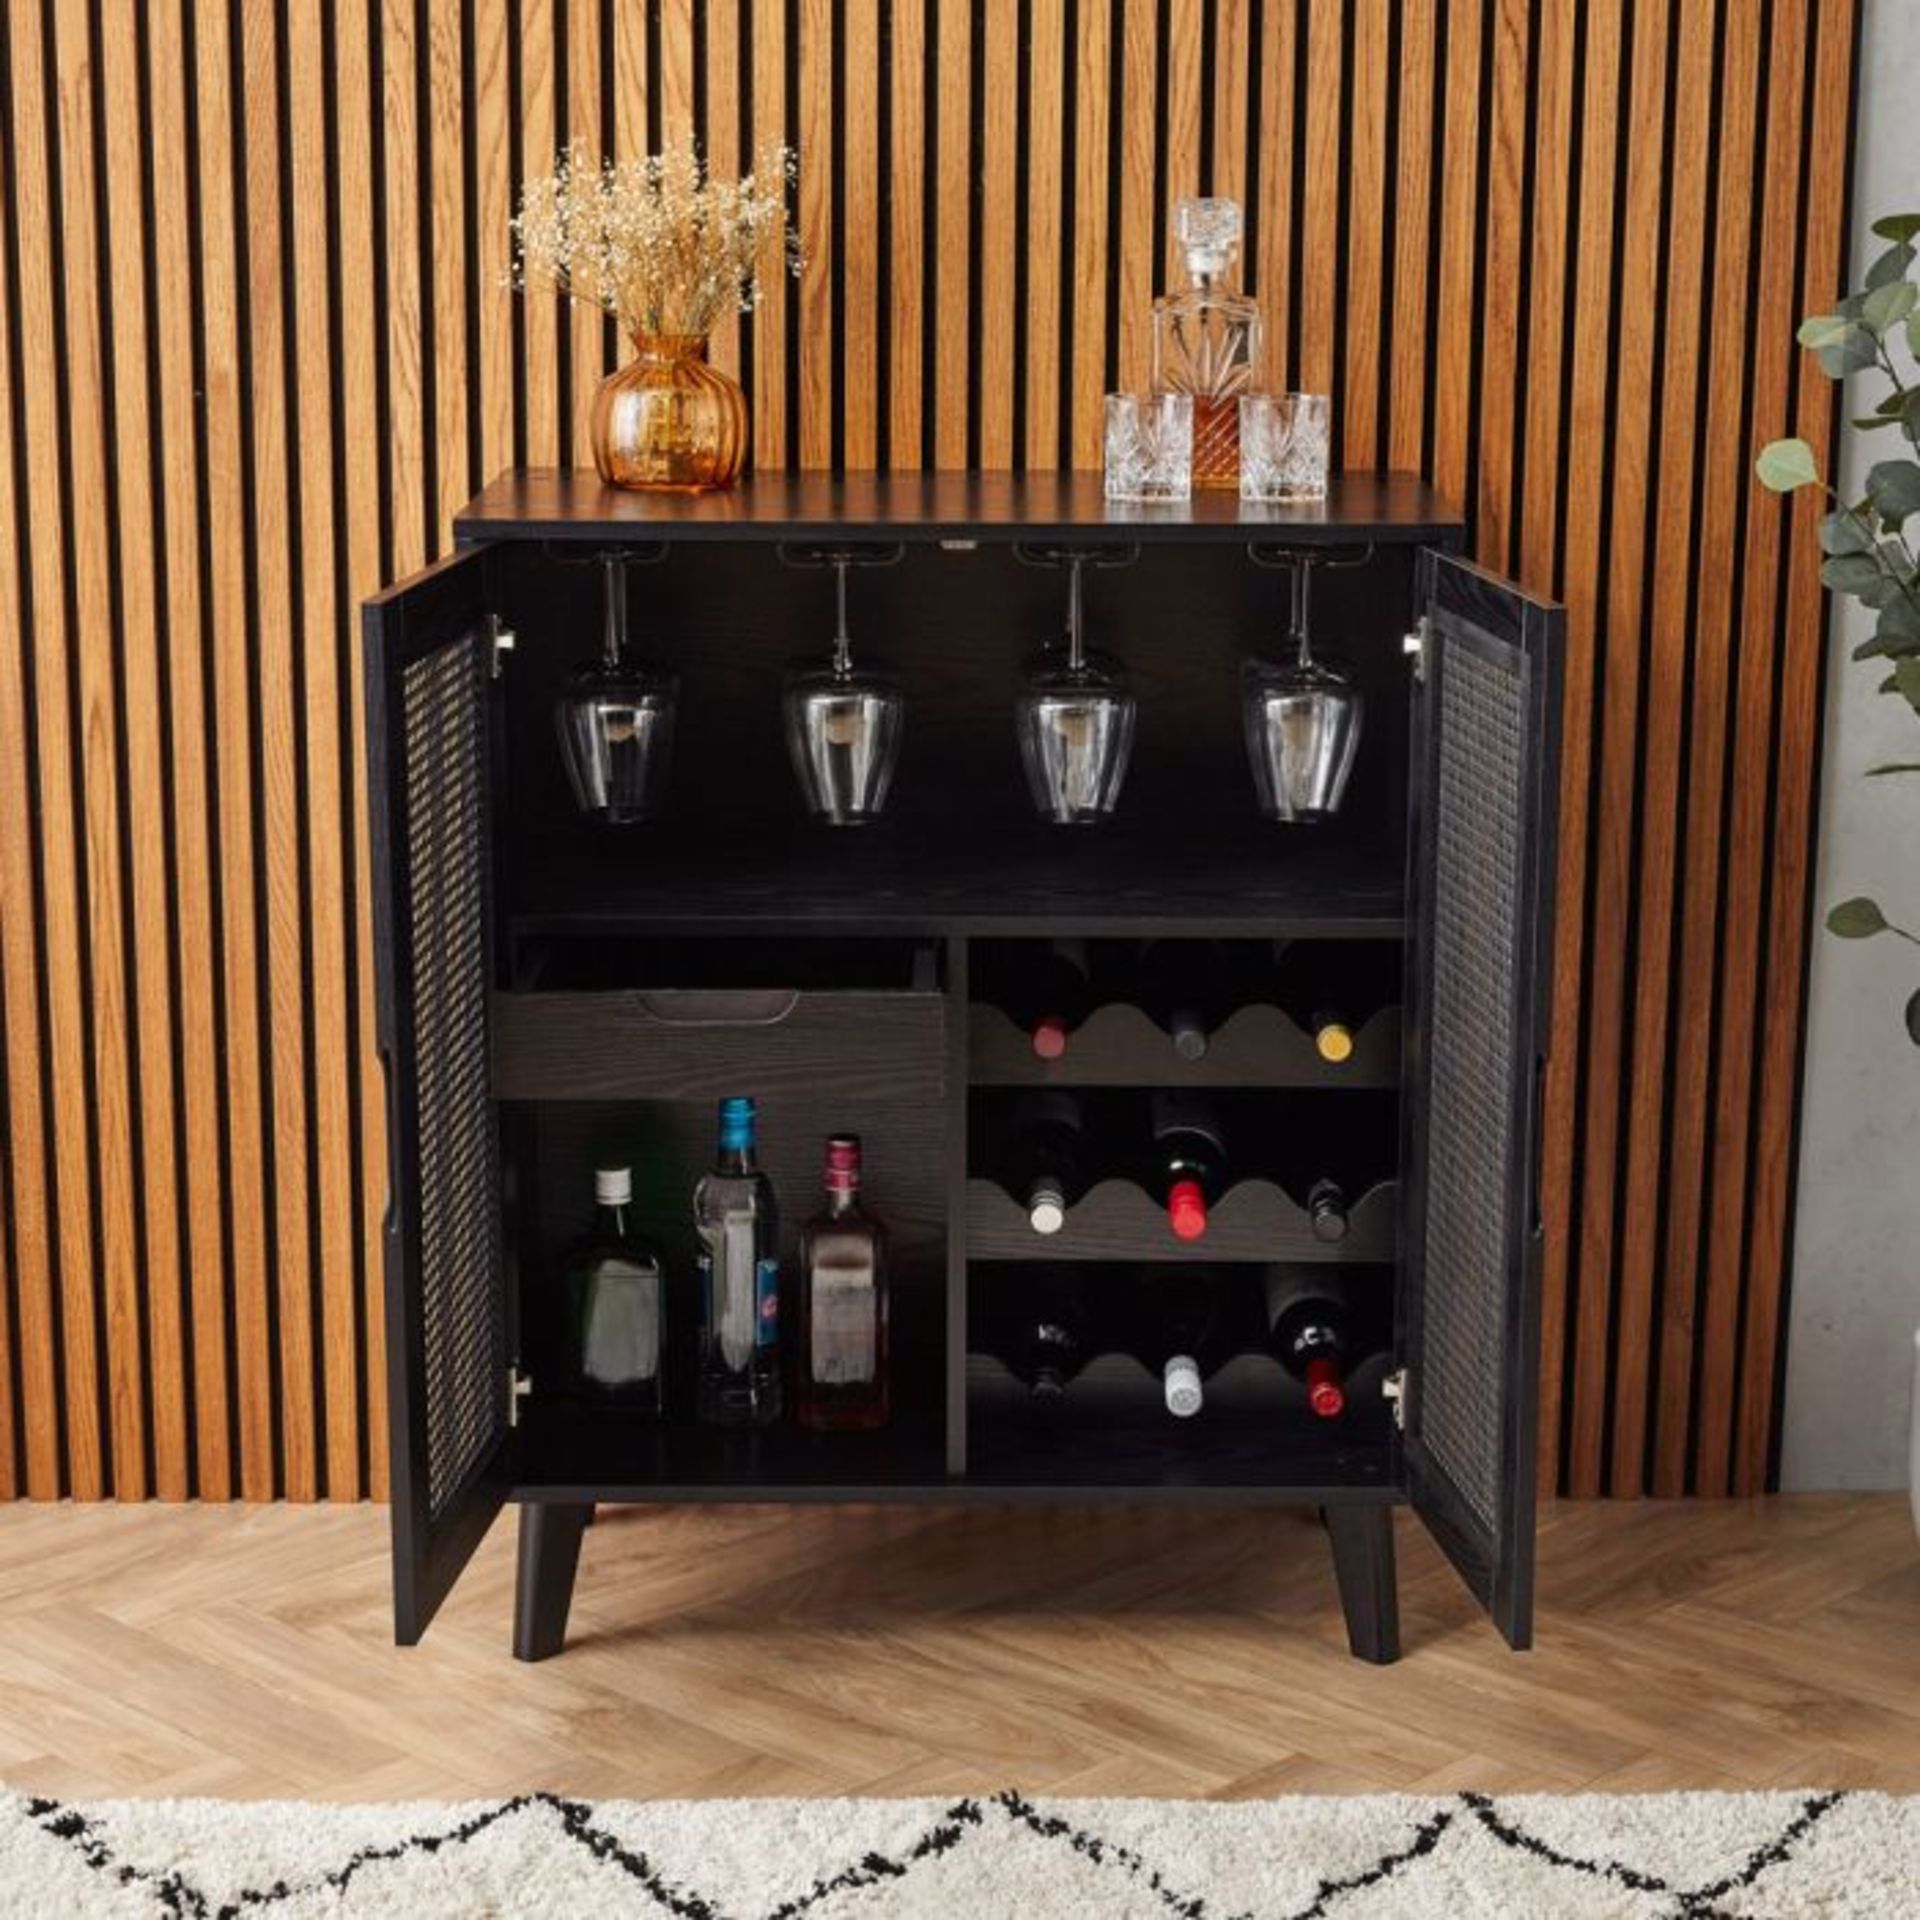 Barton Black Rattan Drinks Cabinet. - ER37. Contained within contemporary black rattan doors, our